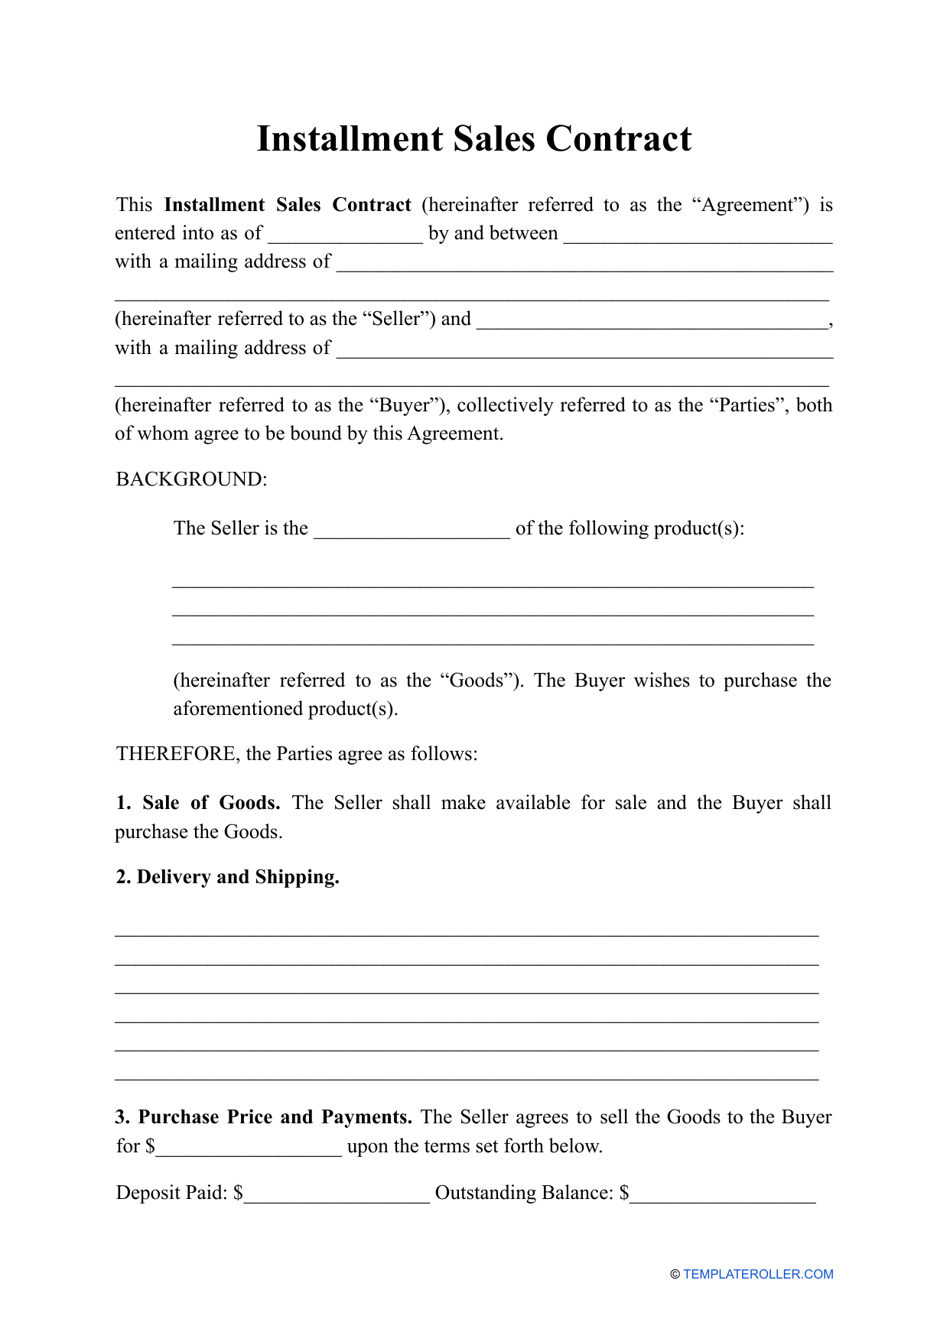 Installment Sales Contract Template Download Printable PDF Regarding financial payment plan agreement template